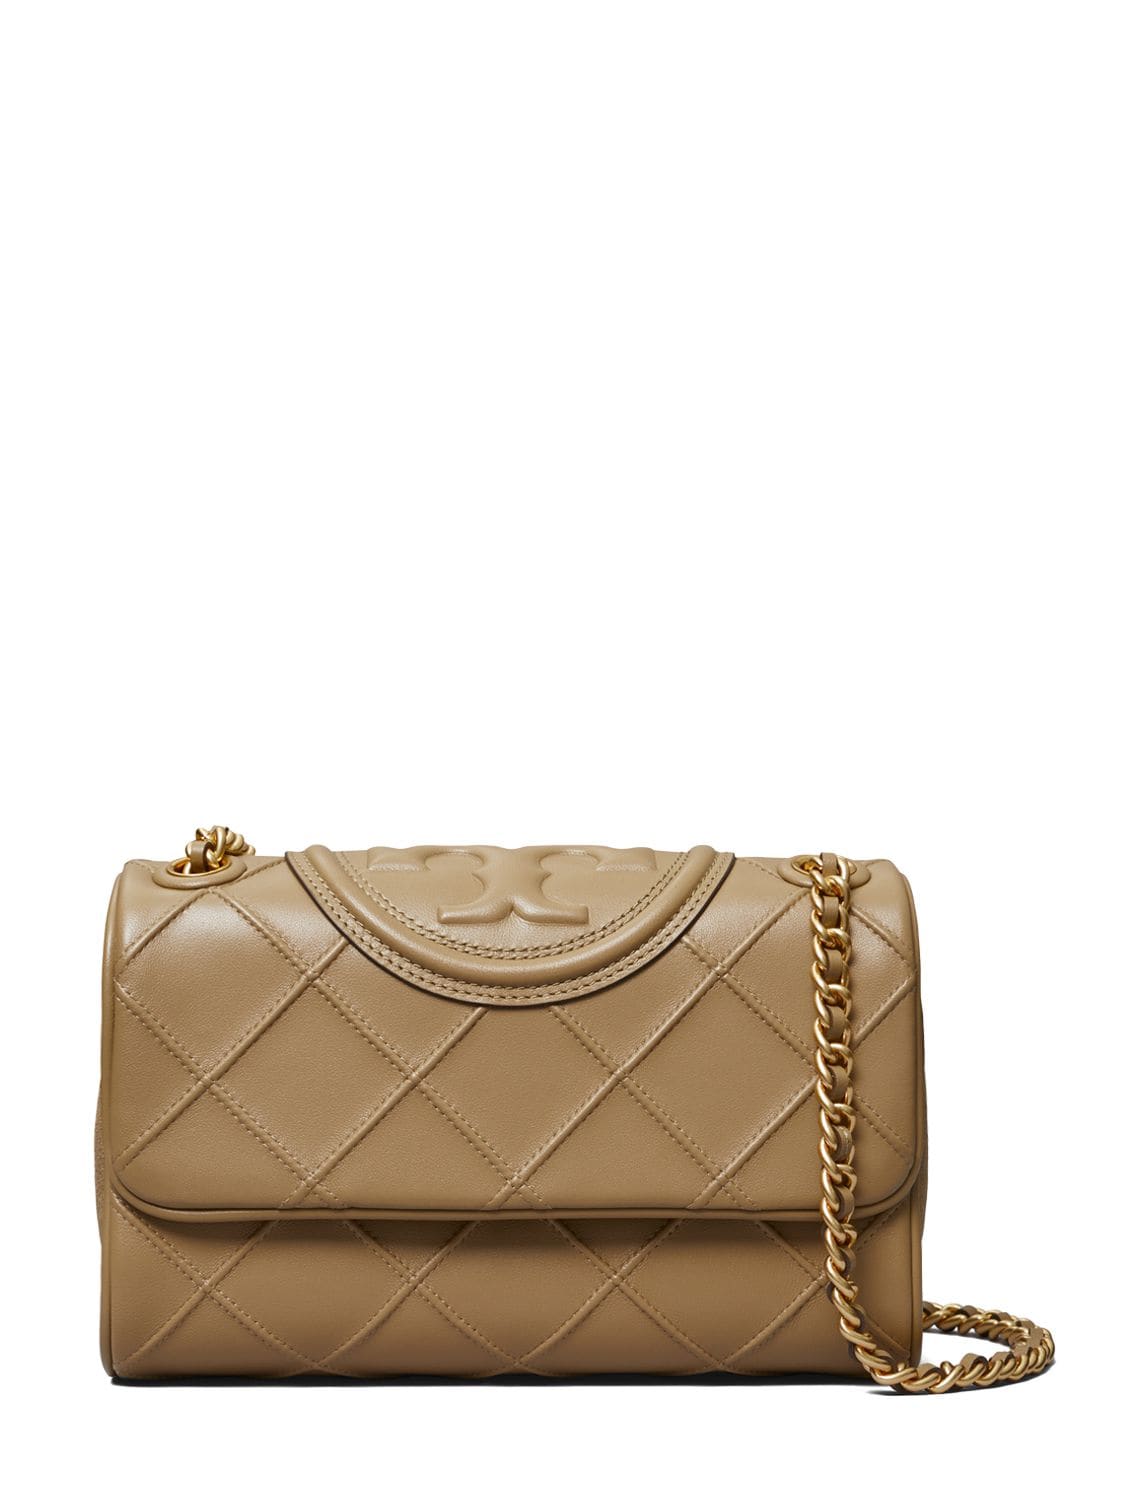 Tory Burch Fleming Small Quilted Leather Convertible Shoulder Bag In Pebblestone